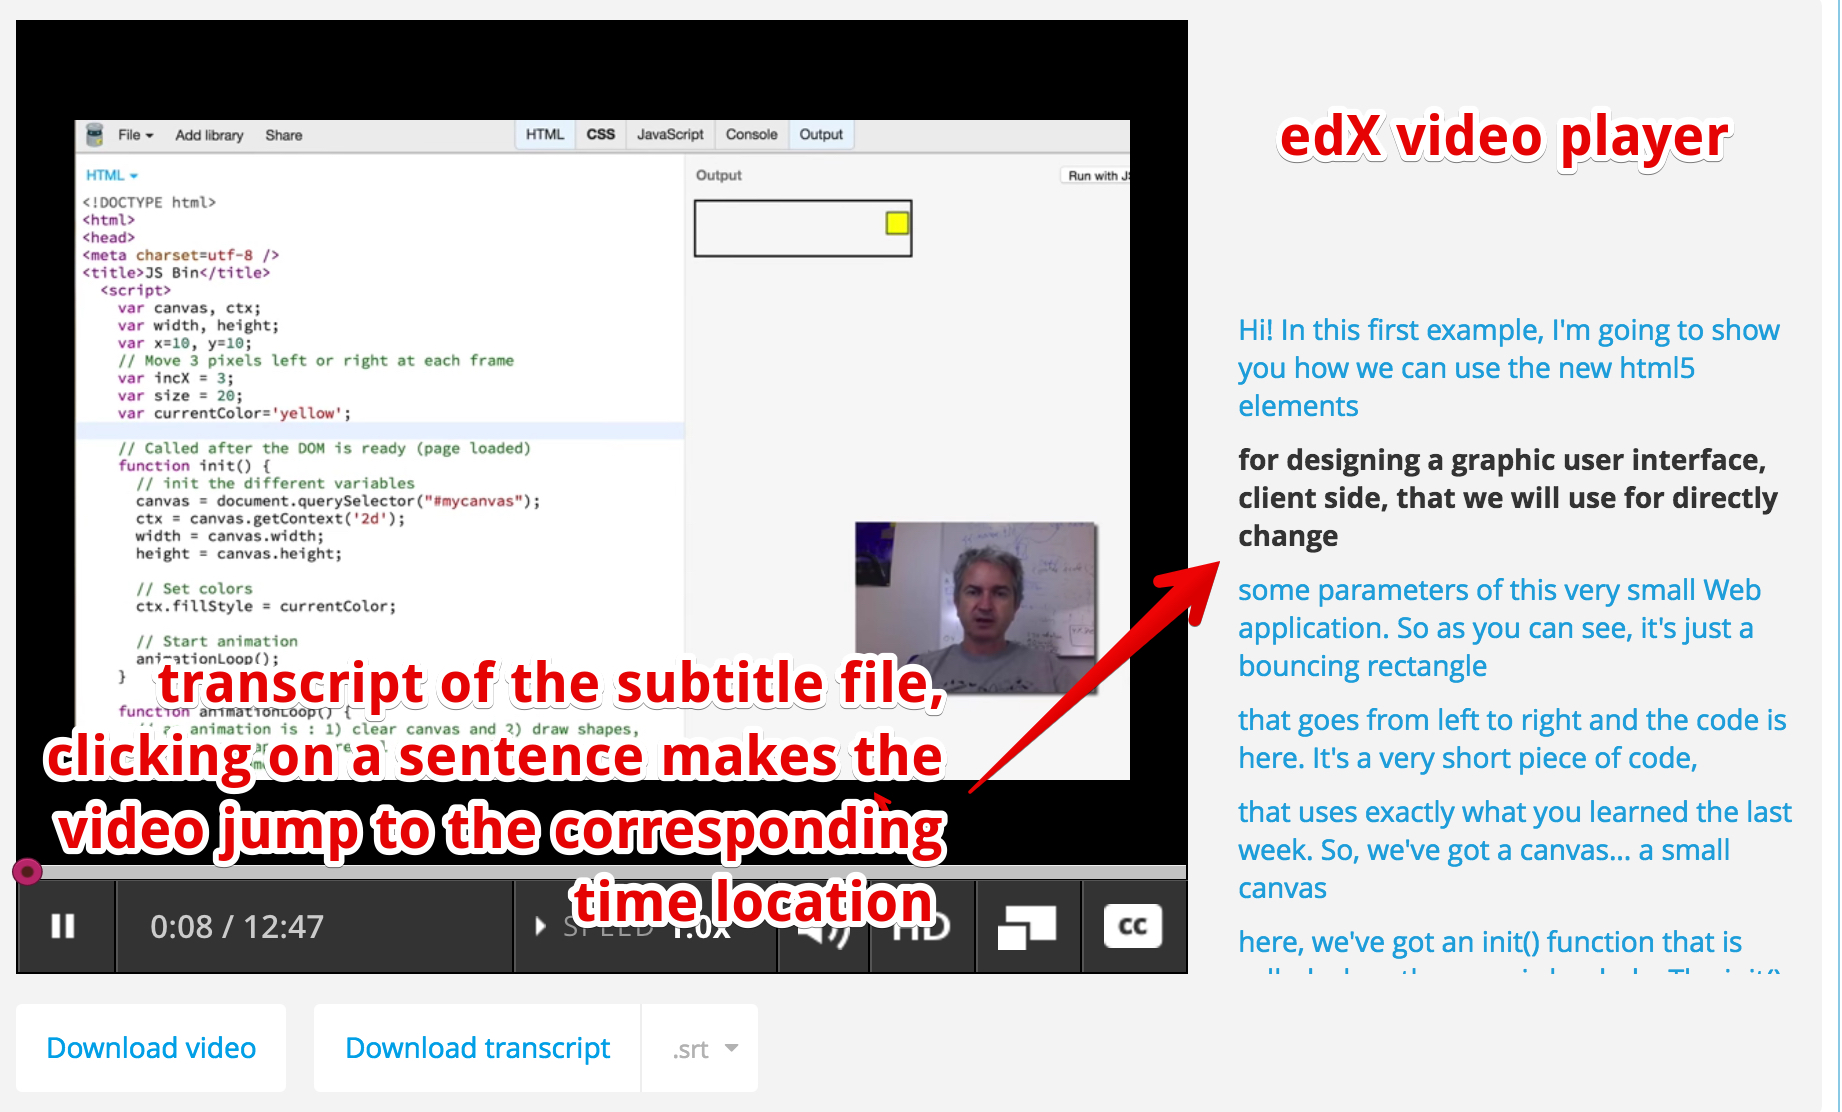 edX video player with clickable transcript on the right